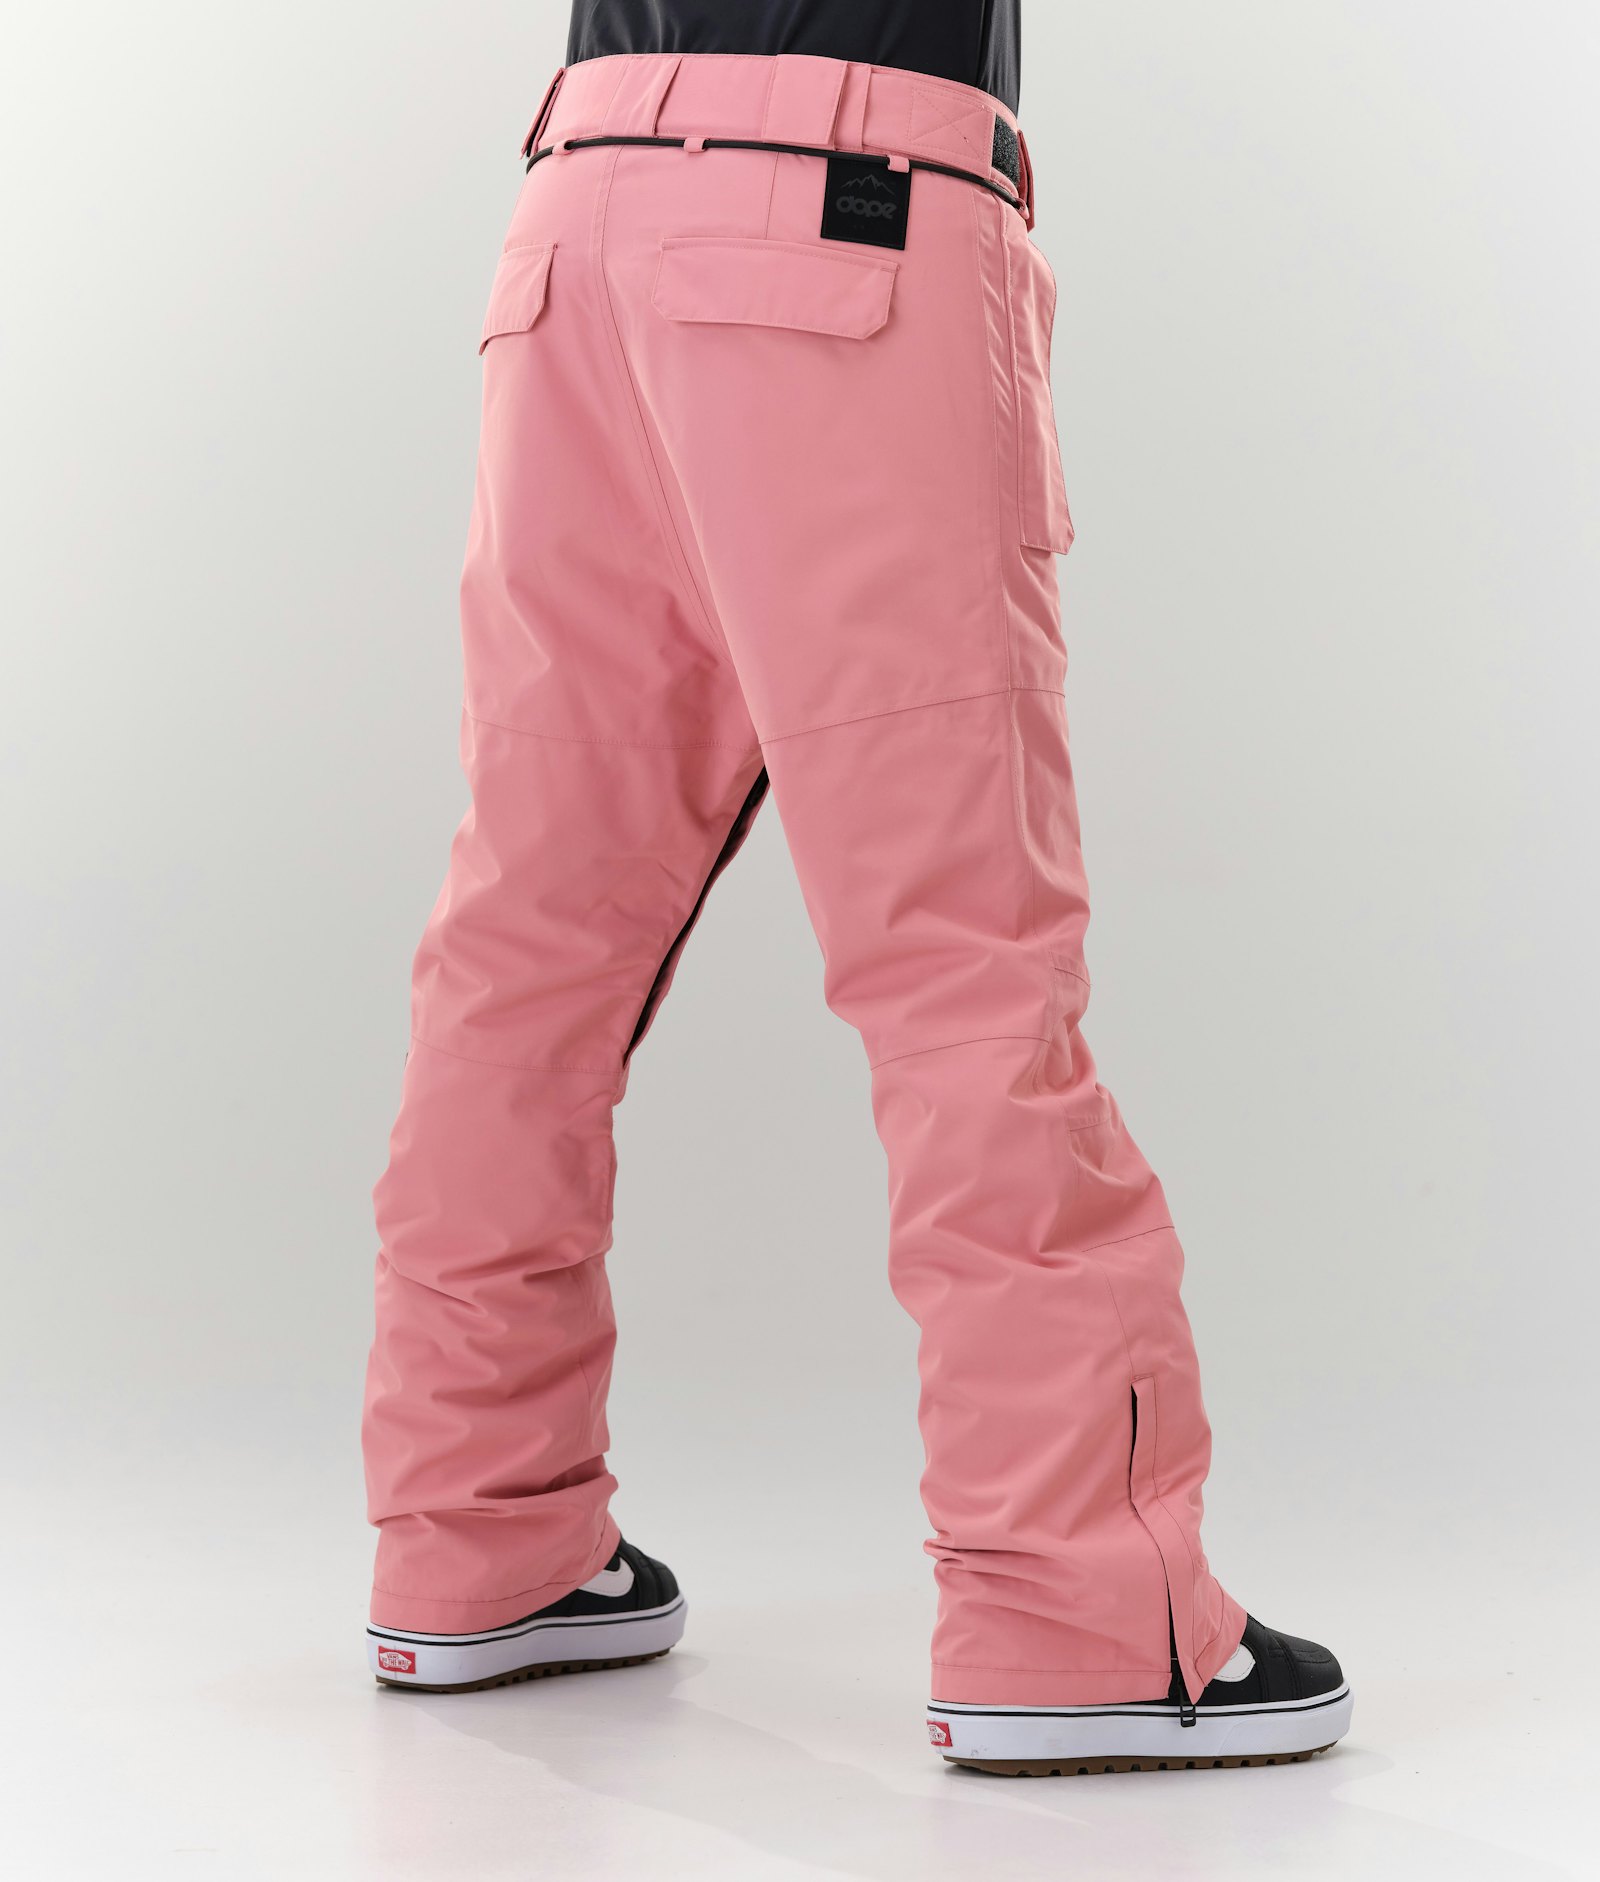 Iconic NP W Snowboard Pants Women Pink, Image 3 of 5